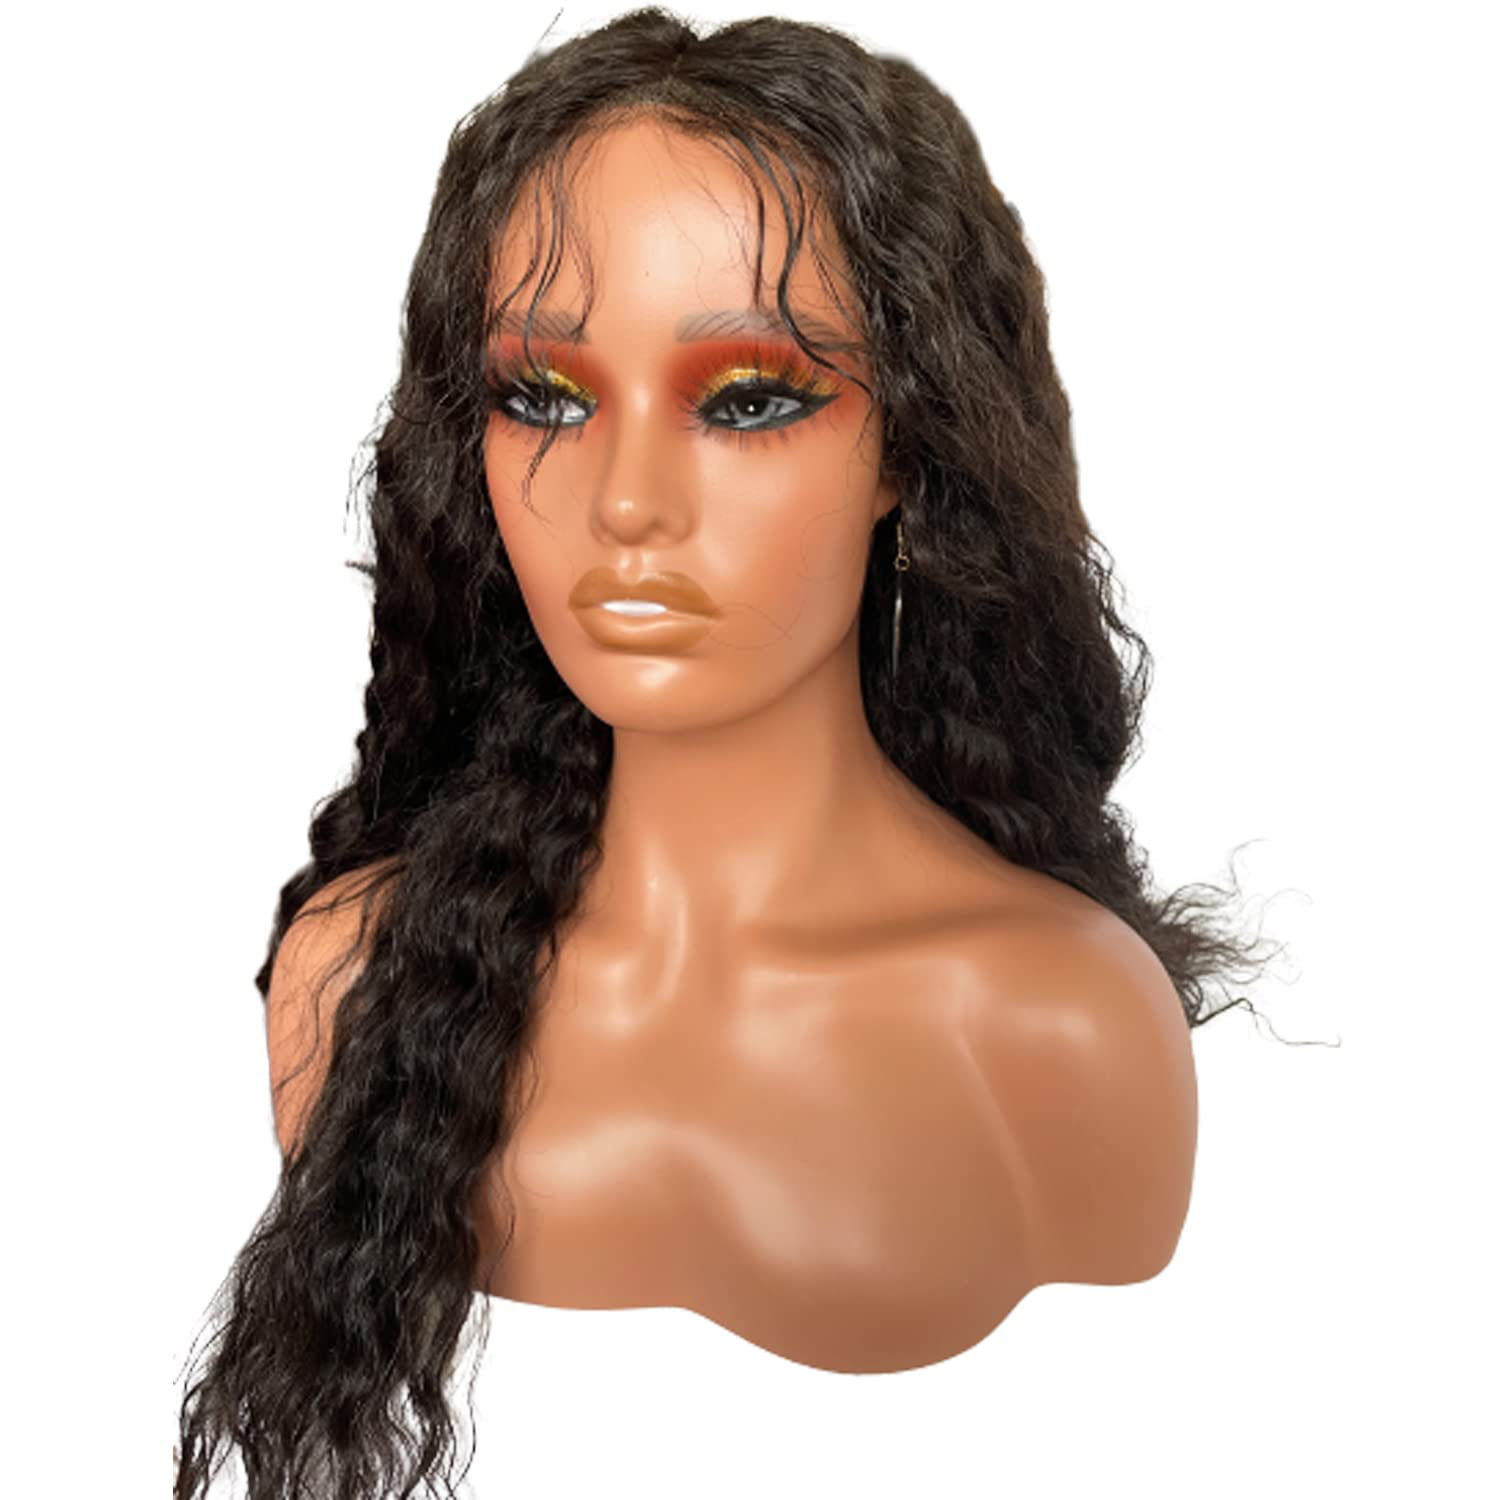  Realistic Female Mannequin Head with Shoulder Display Manikin  Head Bust for Wigs,Makeup,Beauty Accessories Displaying : Everything Else